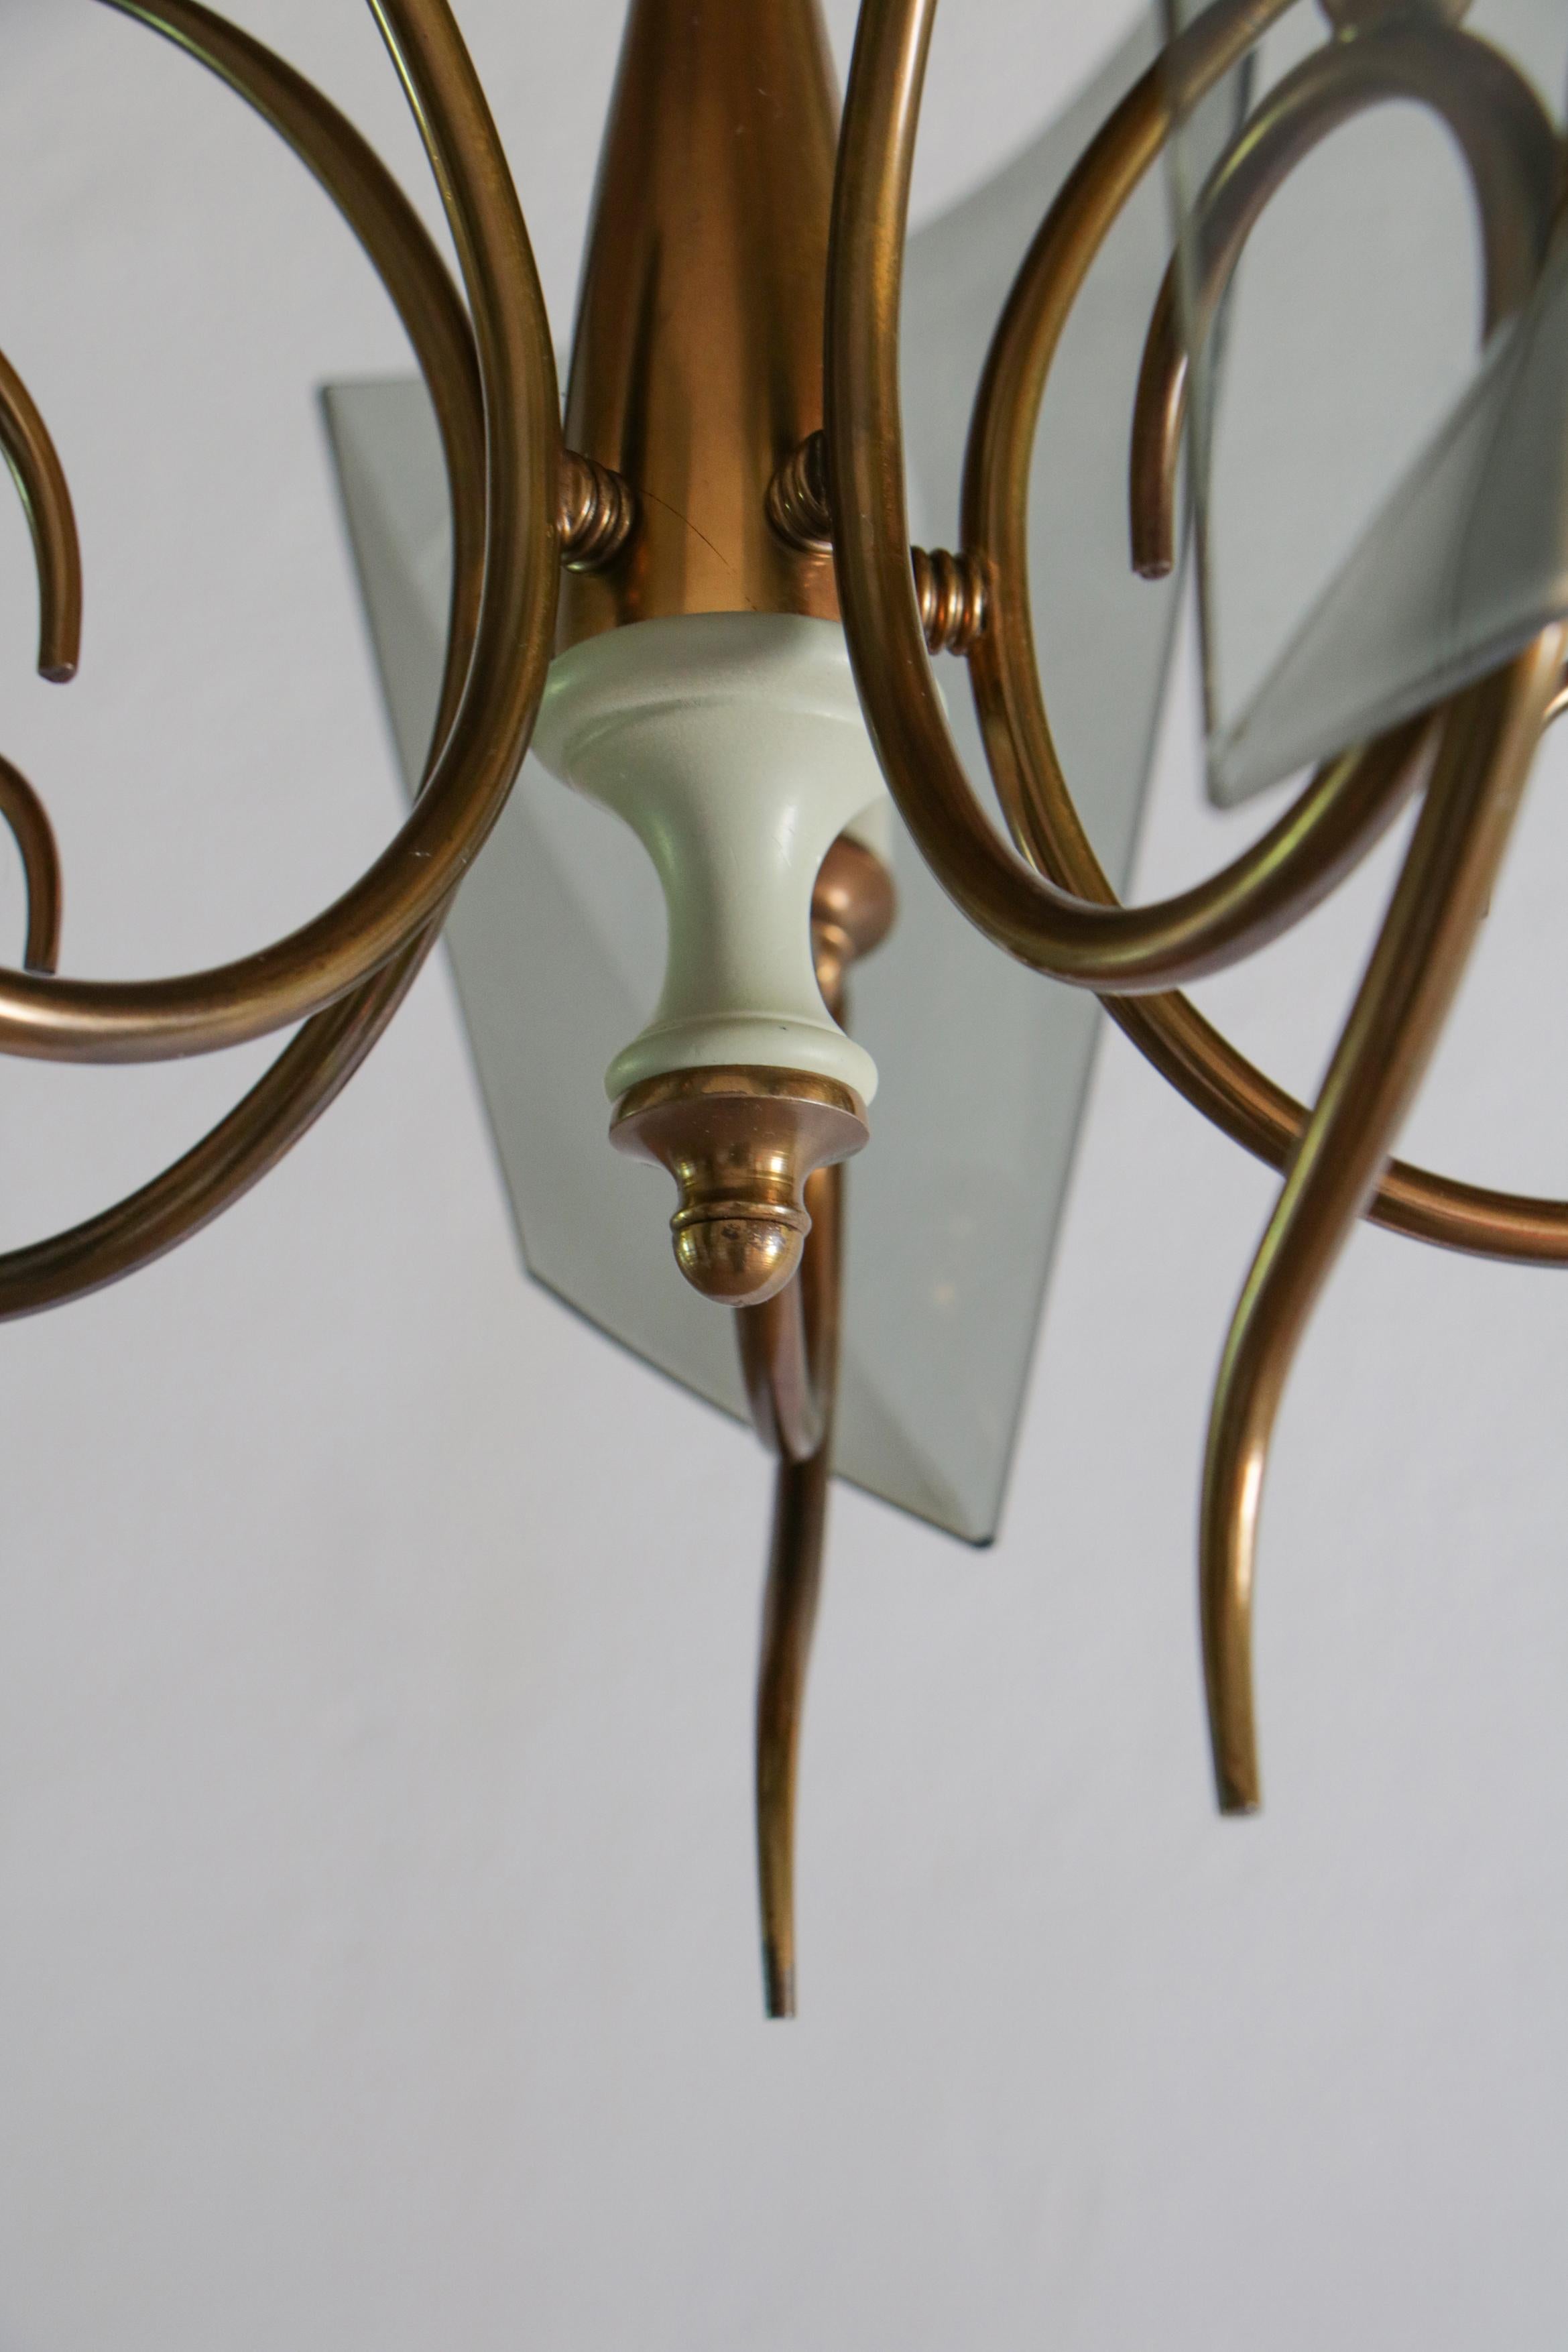 Italian Mid-Century Curved Glass Chandelier Attributed to Fontana Arte, 1950s For Sale 1